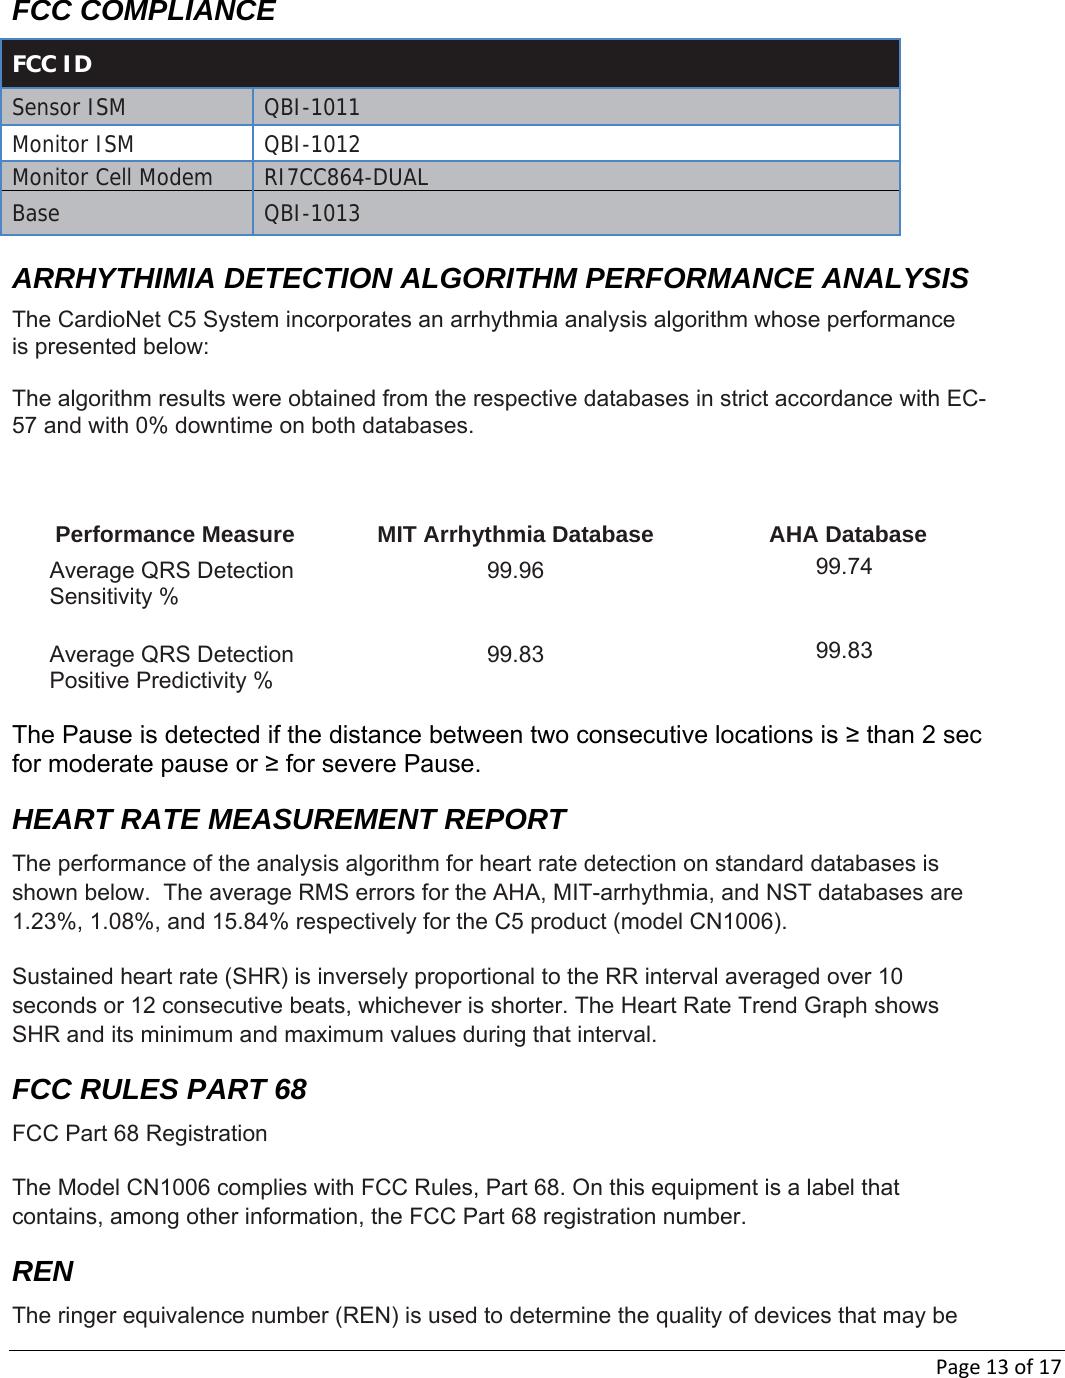 Page13of17FCC COMPLIANCE  FCC ID   Sensor ISM   QBI-1011  Monitor ISM   QBI-1012  Monitor Cell Modem   RI7CC864-DUAL  Base  QBI-1013 ARRHYTHIMIA DETECTION ALGORITHM PERFORMANCE ANALYSIS  The CardioNet C5 System incorporates an arrhythmia analysis algorithm whose performance is presented below:  The algorithm results were obtained from the respective databases in strict accordance with EC-57 and with 0% downtime on both databases.    Performance Measure MIT Arrhythmia Database AHA Database Average QRS Detection Sensitivity % 99.96  99.74  Average QRS Detection Positive Predictivity % 99.83  99.83  The Pause is detected if the distance between two consecutive locations is ≥ than 2 sec for moderate pause or ≥ for severe Pause. HEART RATE MEASUREMENT REPORT  The performance of the analysis algorithm for heart rate detection on standard databases is shown below.  The average RMS errors for the AHA, MIT-arrhythmia, and NST databases are 1.23%, 1.08%, and 15.84% respectively for the C5 product (model CN1006). Sustained heart rate (SHR) is inversely proportional to the RR interval averaged over 10 seconds or 12 consecutive beats, whichever is shorter. The Heart Rate Trend Graph shows SHR and its minimum and maximum values during that interval.  FCC RULES PART 68  FCC Part 68 Registration  The Model CN1006 complies with FCC Rules, Part 68. On this equipment is a label that contains, among other information, the FCC Part 68 registration number.  REN  The ringer equivalence number (REN) is used to determine the quality of devices that may be 